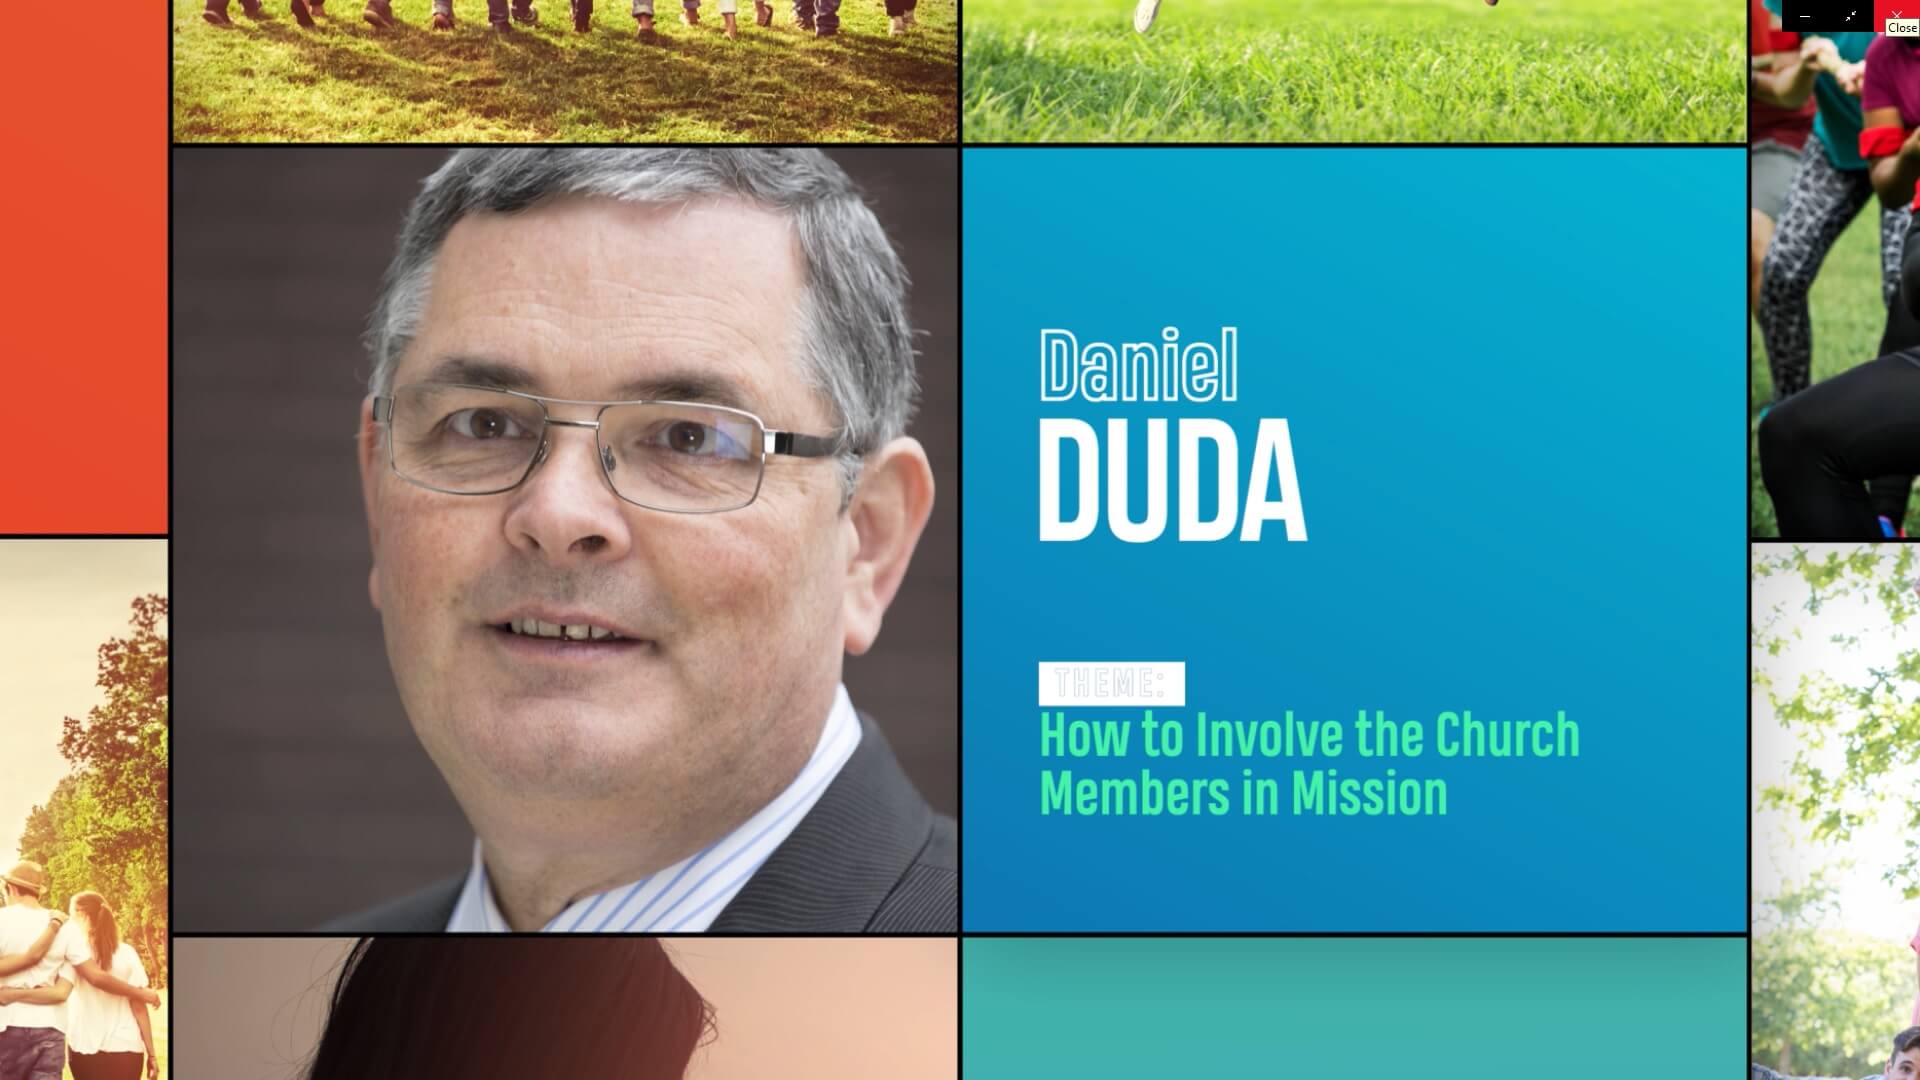 D.Duda How to involve church members into mission